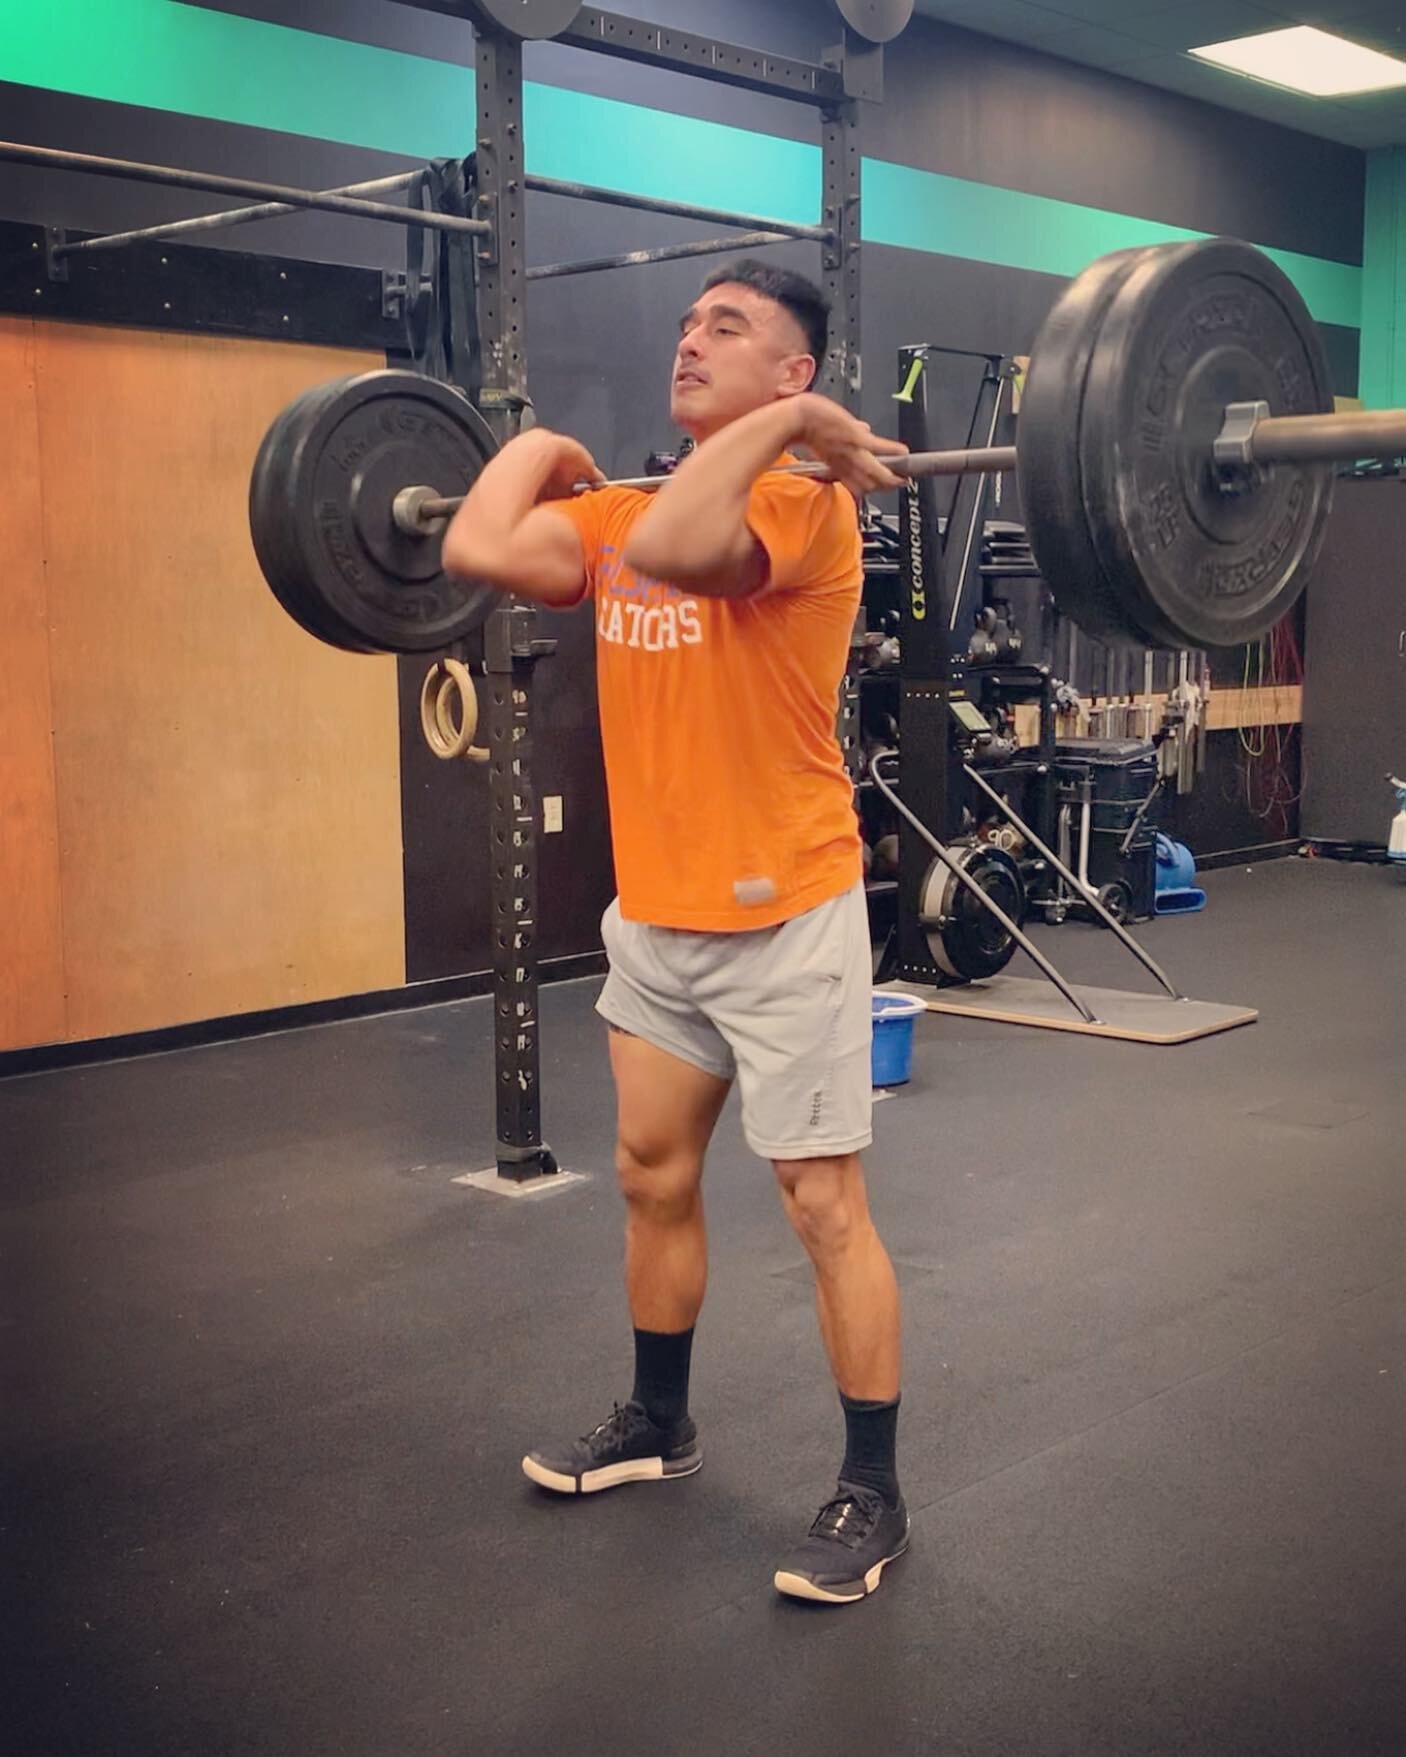 A little late but here&rsquo;s our March Athlete of the Month. Congratulations Rudy Uribe!! 

Since joining the gym family in November Rudy has been such a positive influence. He works hard and encourages others. Always fist bumping on SugarWOD and l